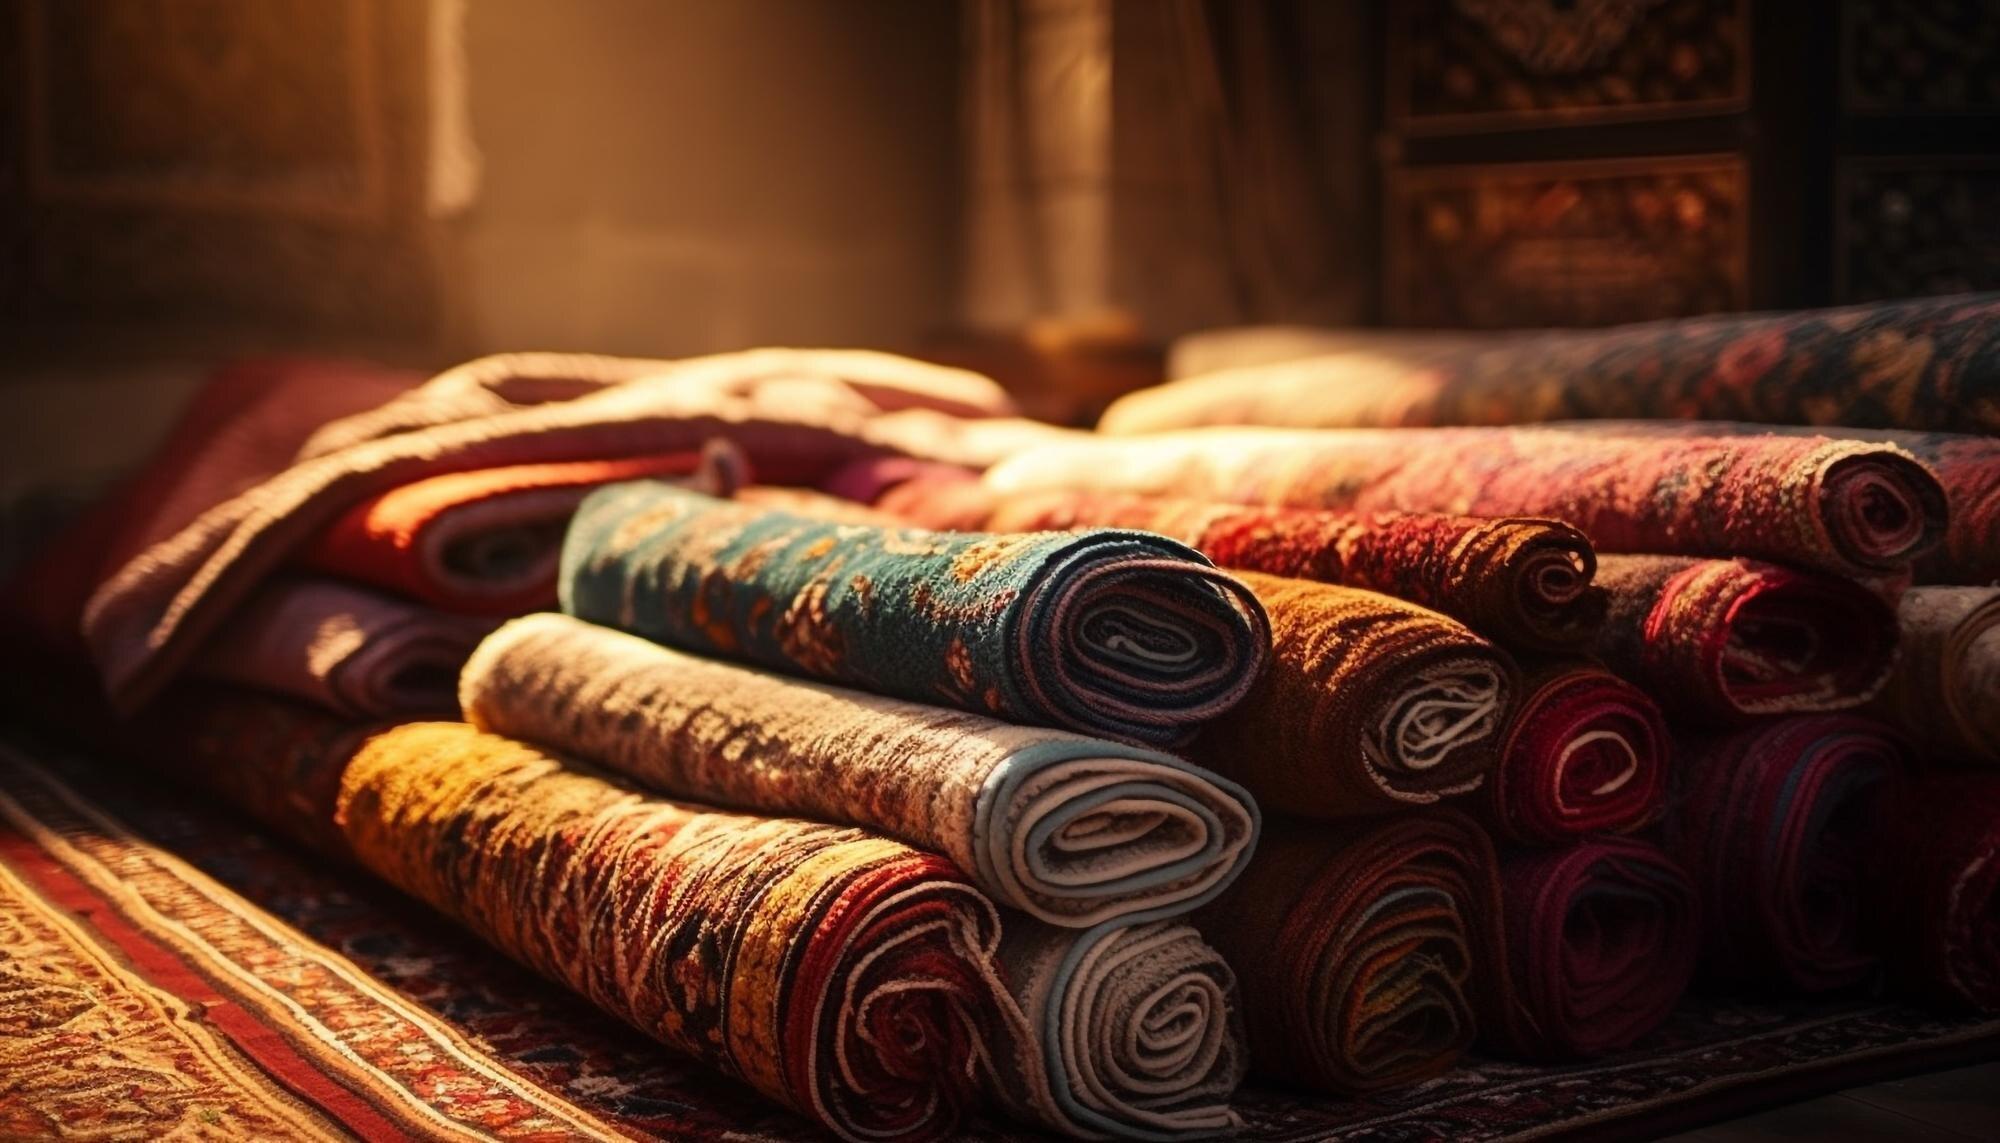 softness-elegance-old-fashioned-textiles-pile-high-generated-by-ai-188544-20510.jpg